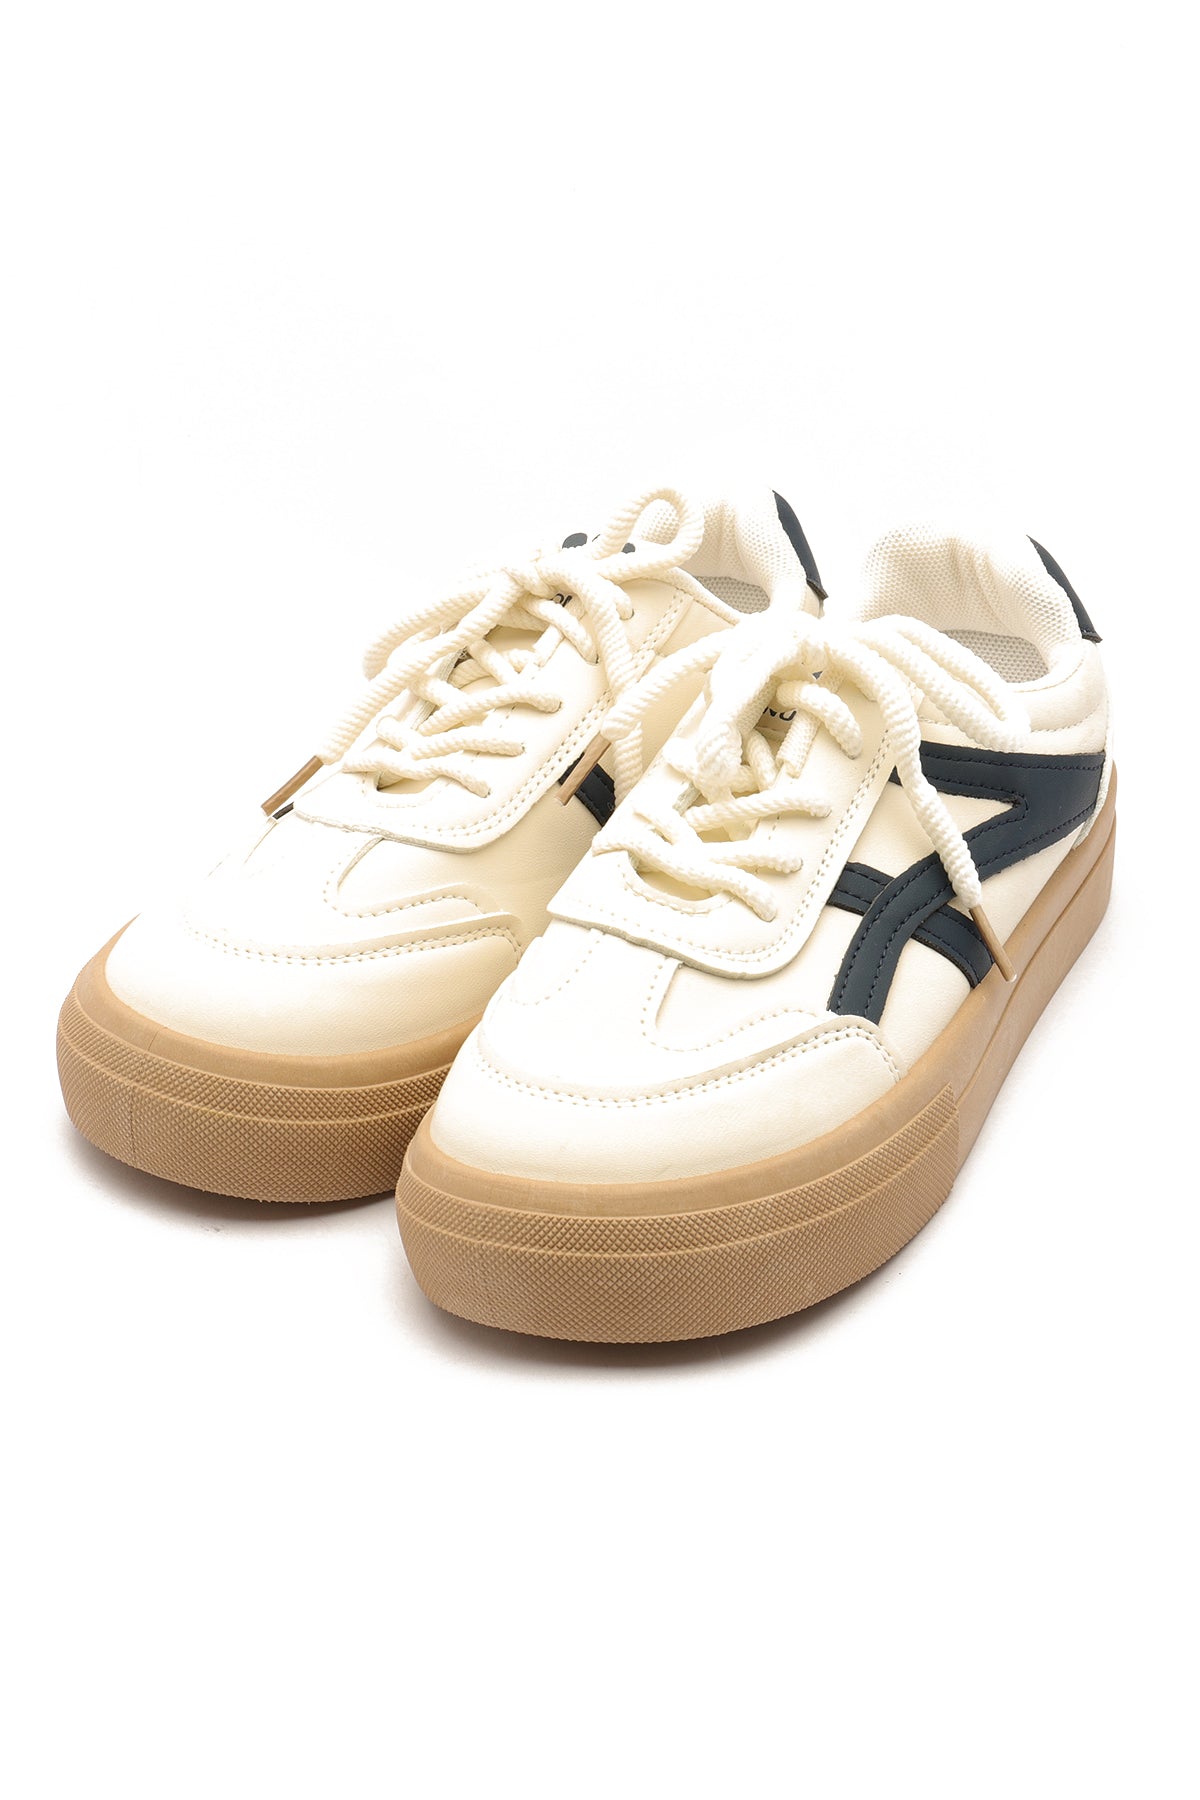 Women's Casual Sneakers Shoes